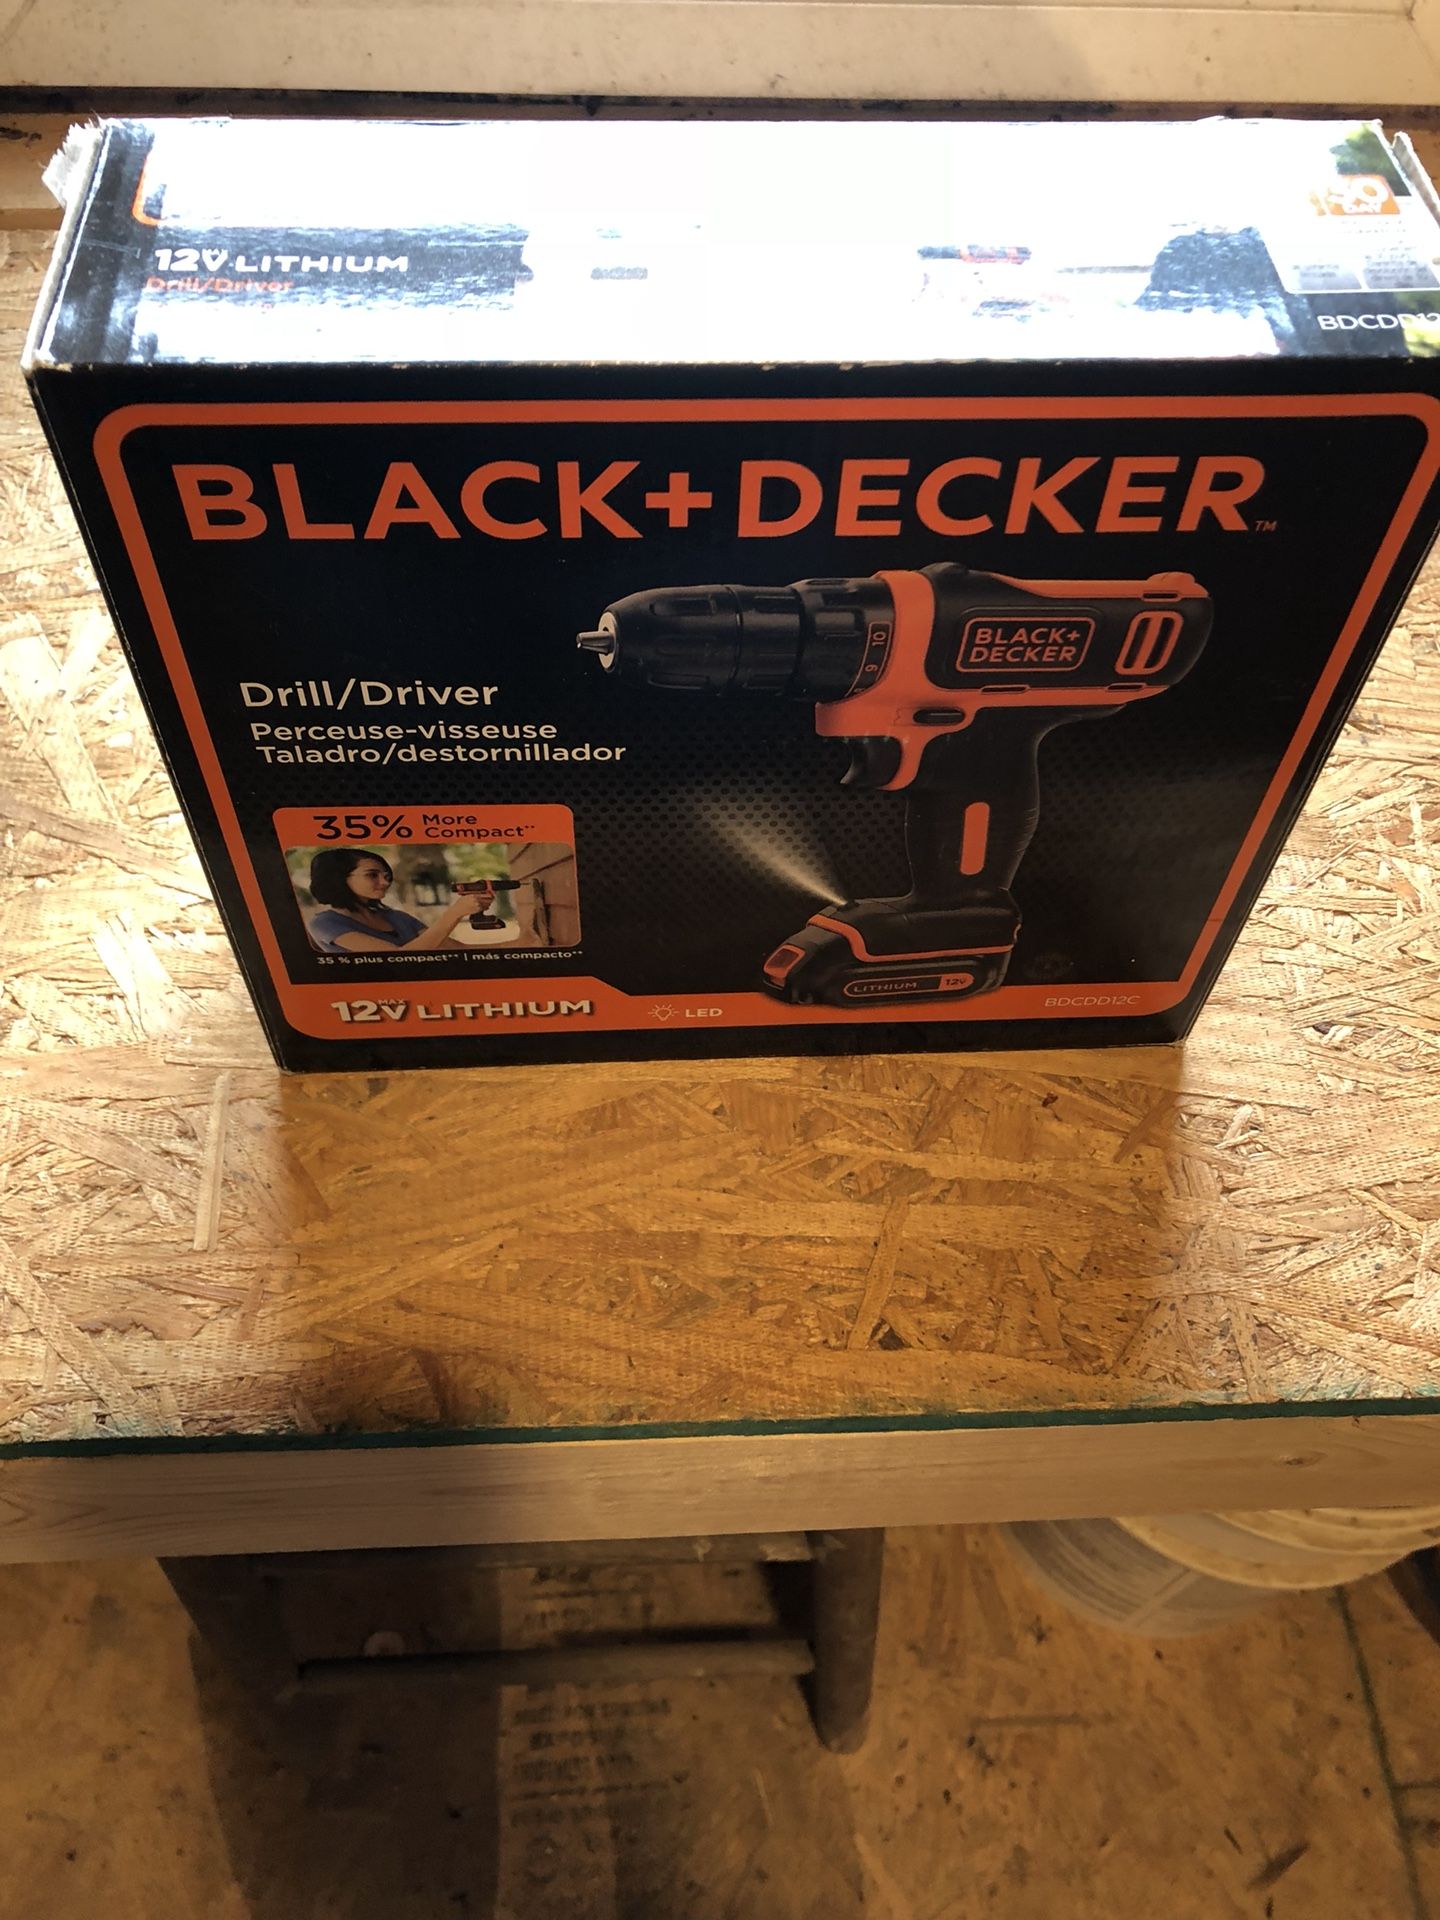 Drill brand new $20.00. Battery not included but it has a charger. I purchased some tools that I have never used and I'm selling some of them. Black